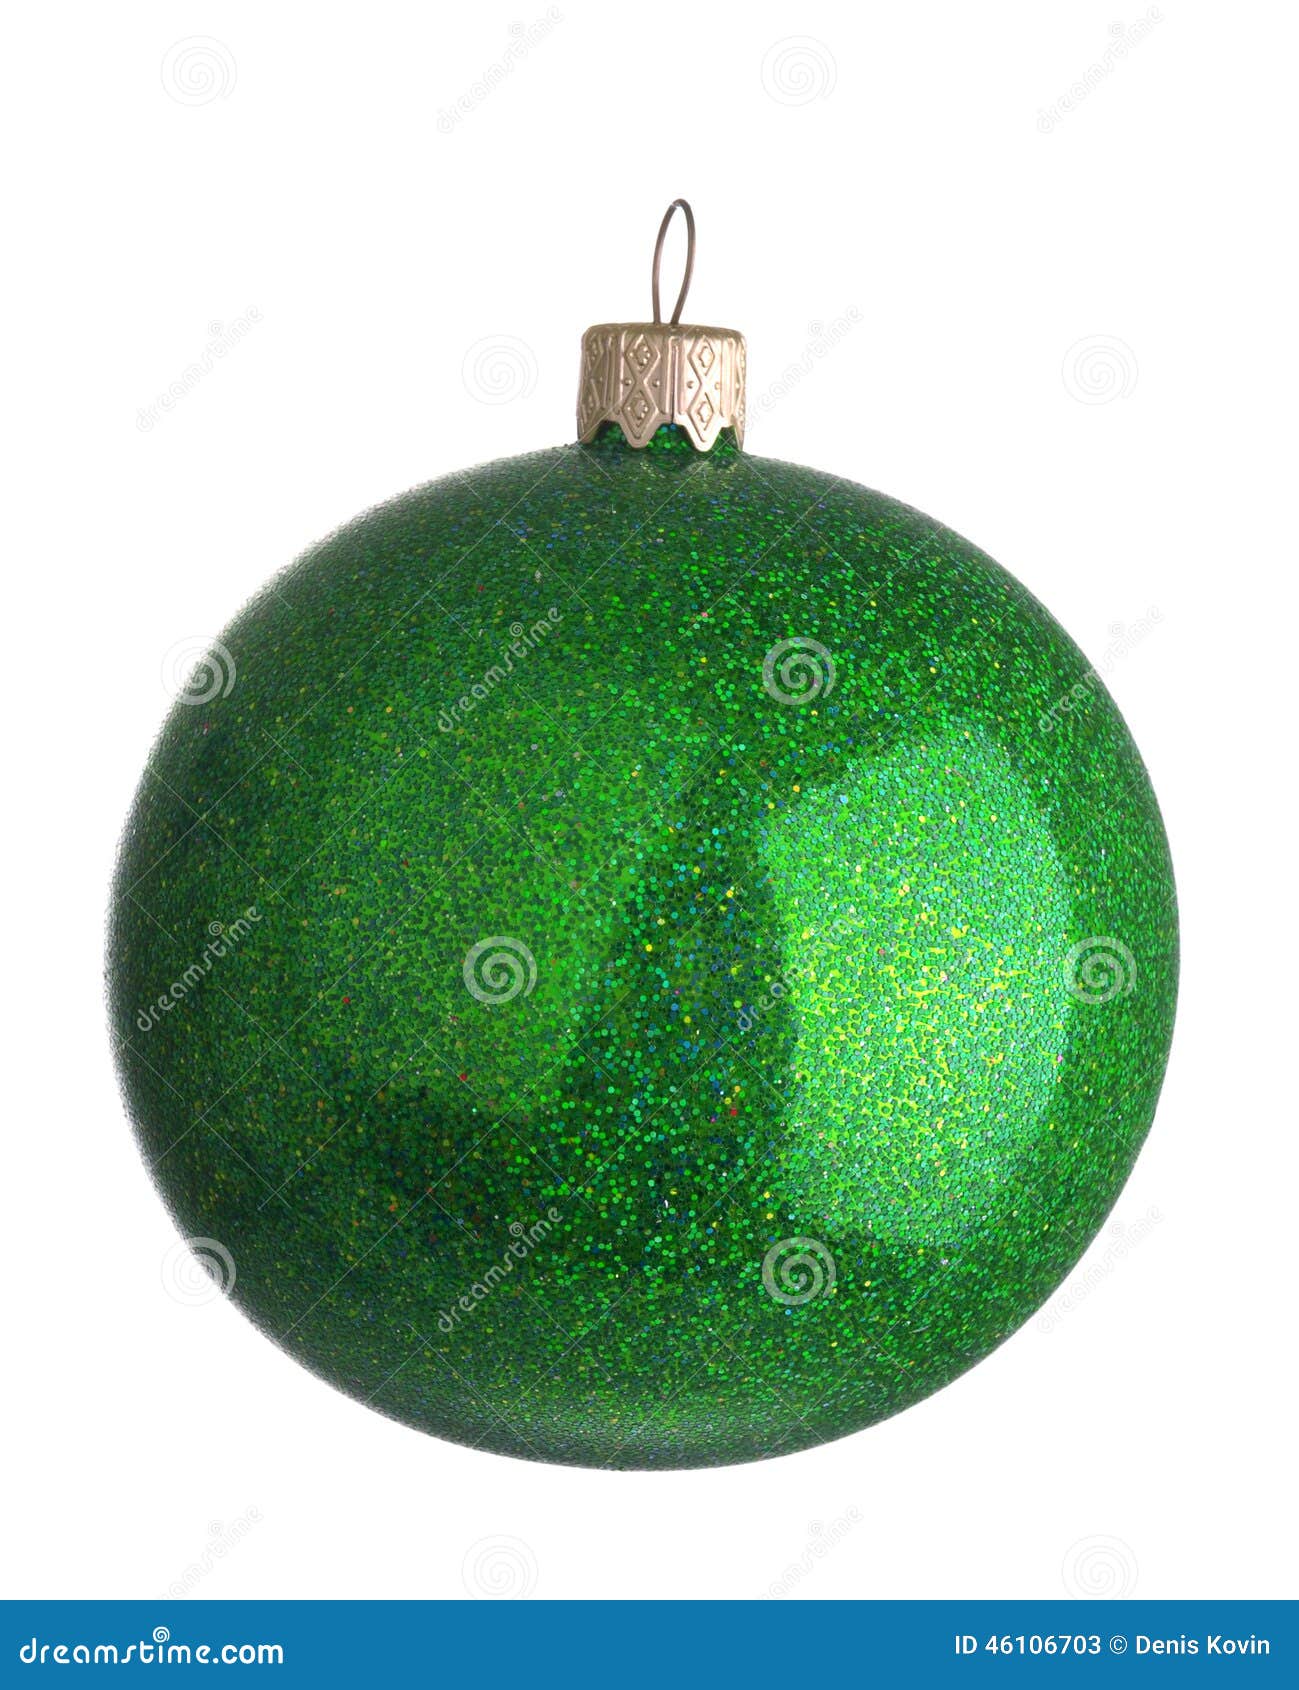 Green christmas ball stock image. Image of round, sphere - 46106703